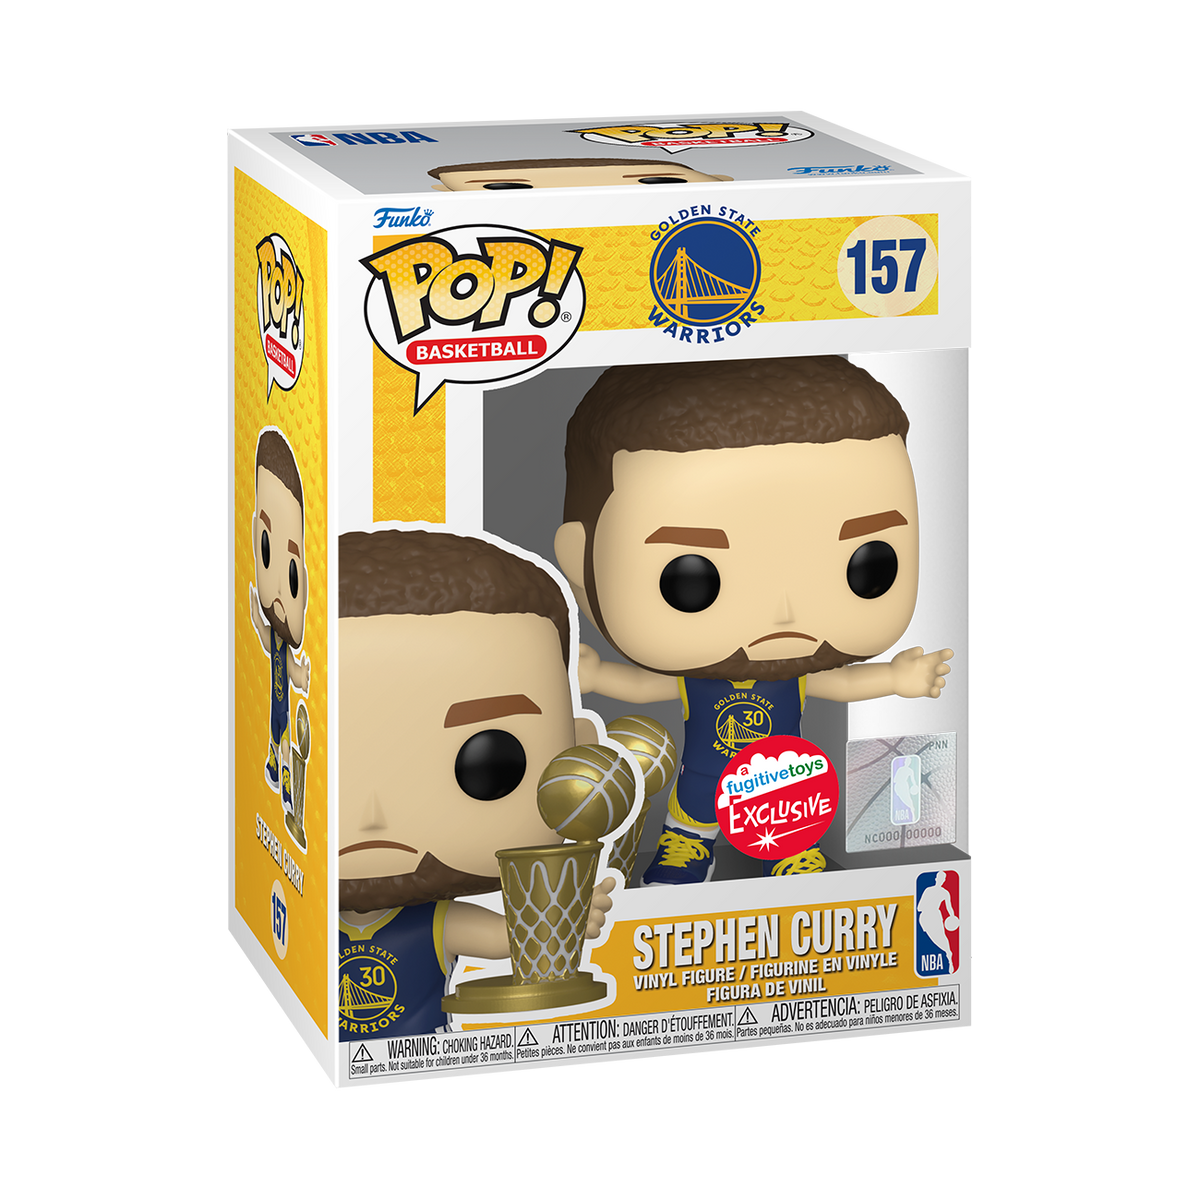 NBA SLAM Stephen Curry Funko Pop! Cover Figure #13 with Case